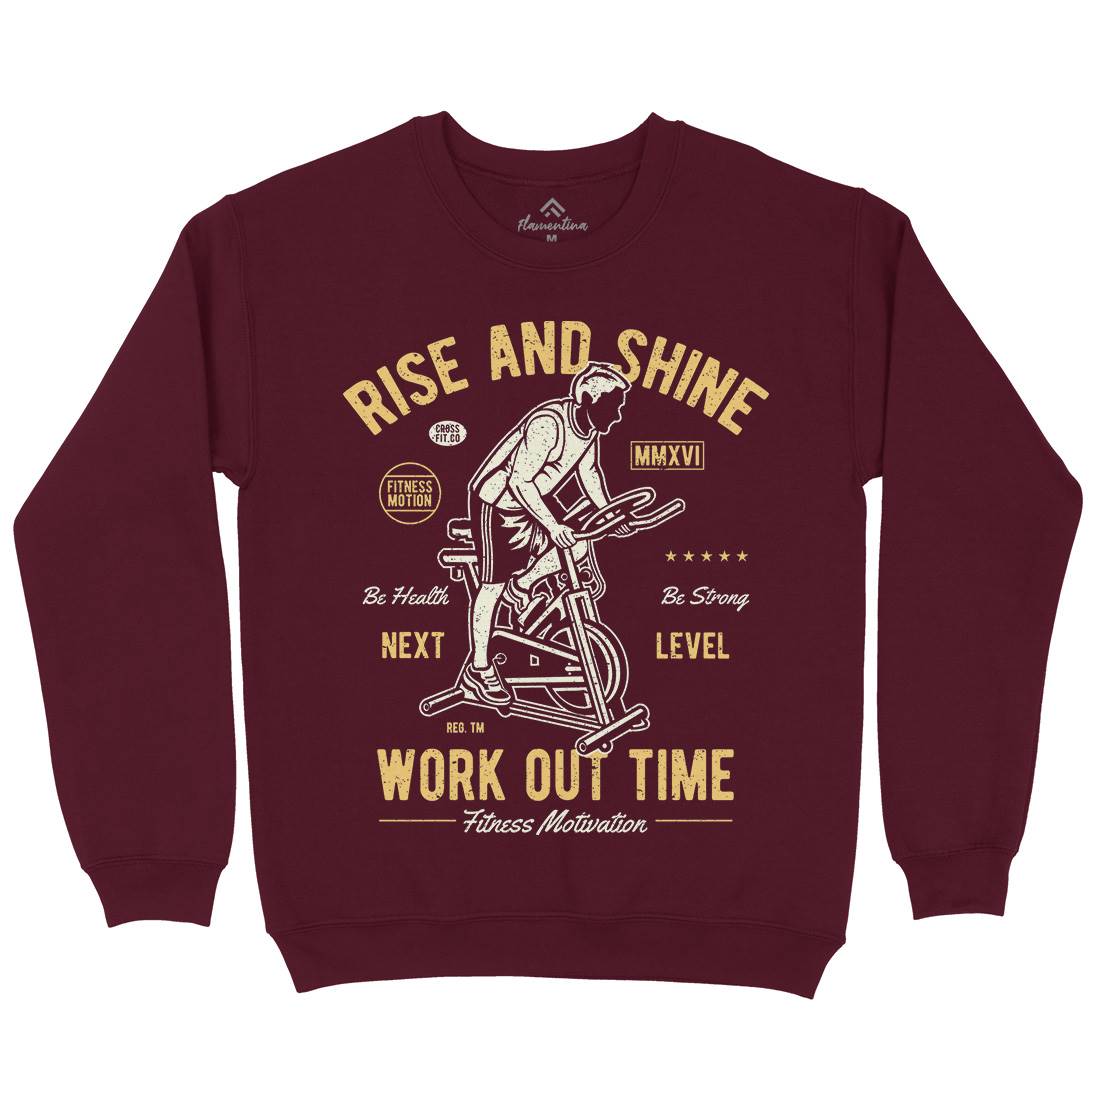 Work Out Time Kids Crew Neck Sweatshirt Gym A199